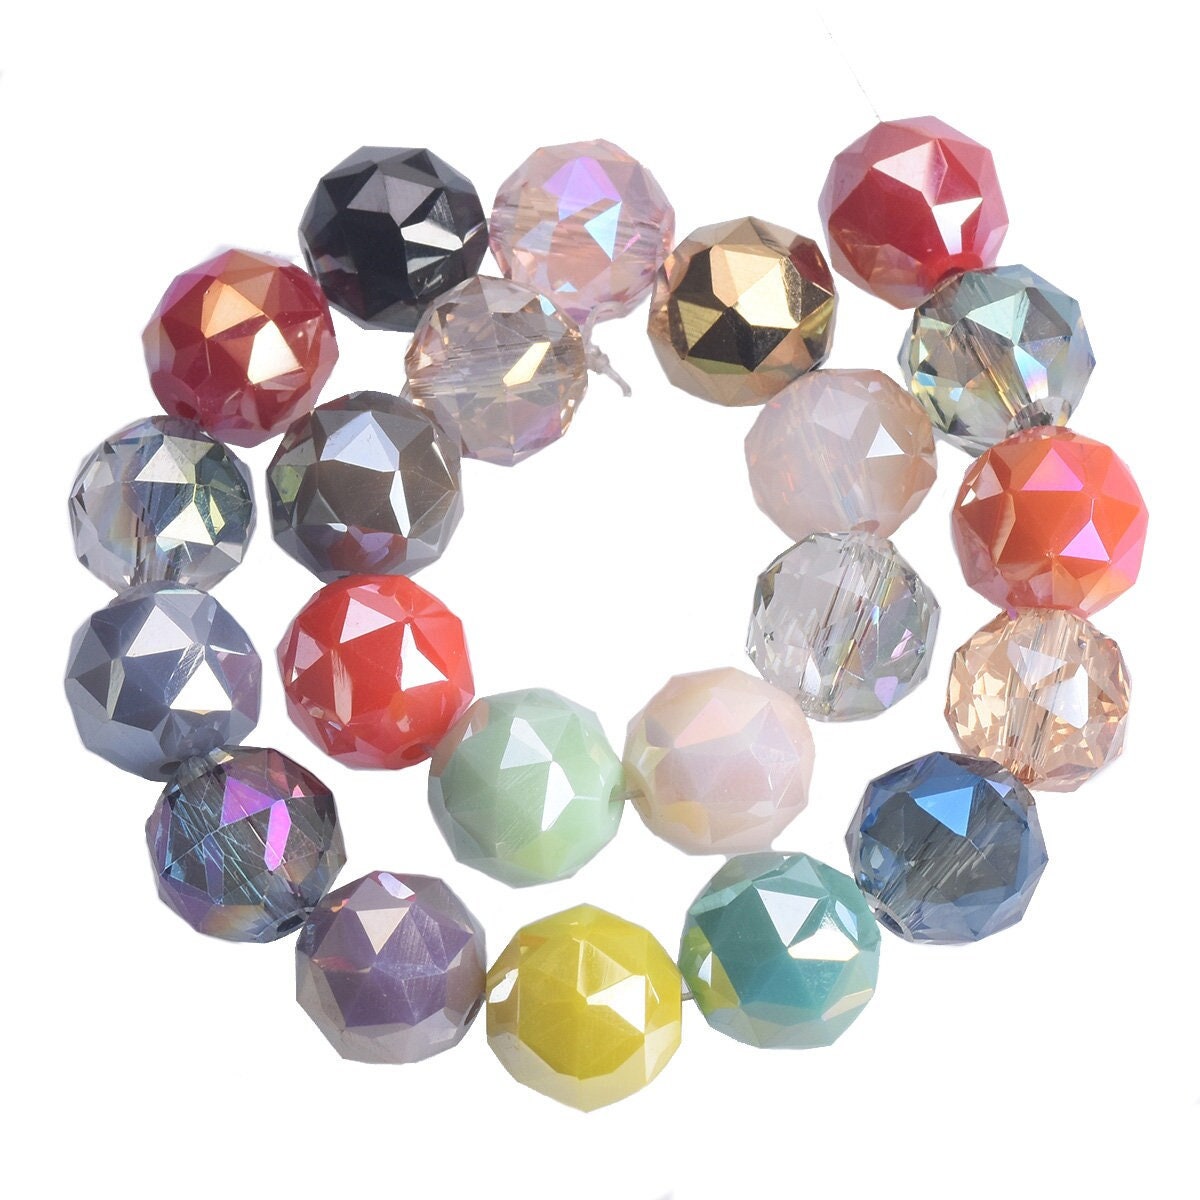 Colorful Round 6mm 8mm 10mm Faceted Crystal Glass Loose Beads Lot